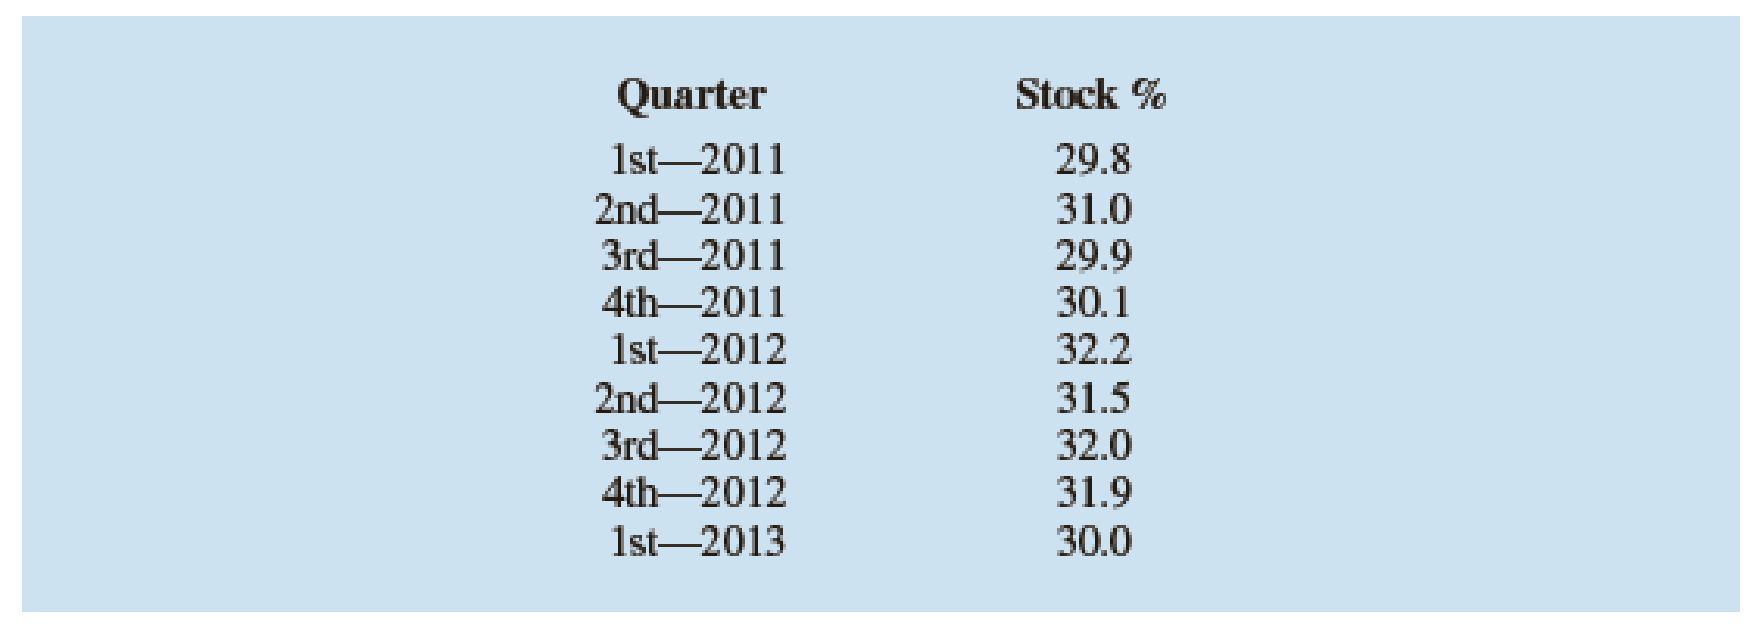 Chapter 17, Problem 42SE, The following table reports the percentage of stocks in a portfolio for nine quarters from 2011 to 